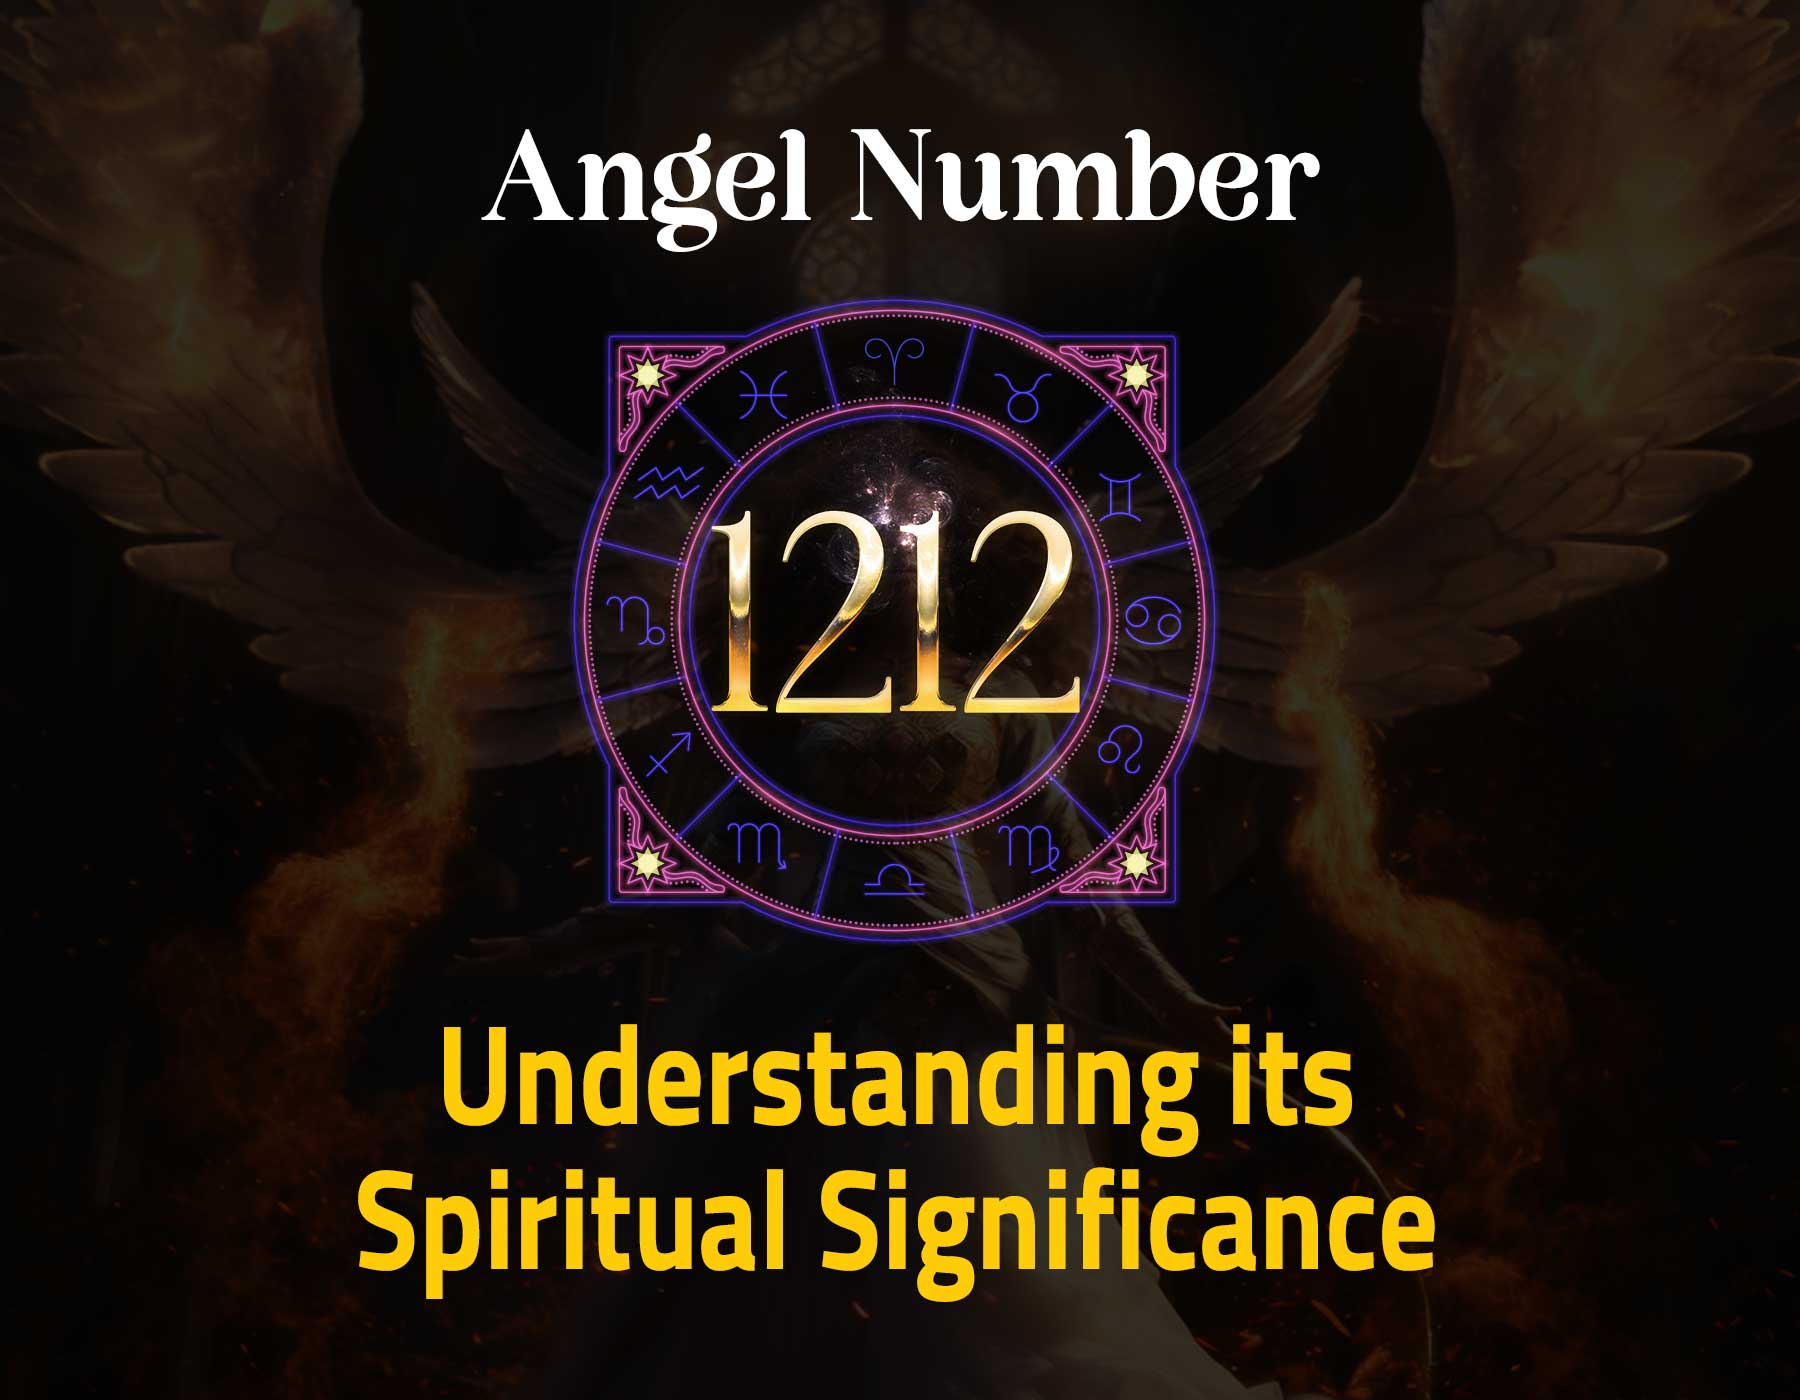 Angel Number 1212 : Understanding its Spiritual Significance